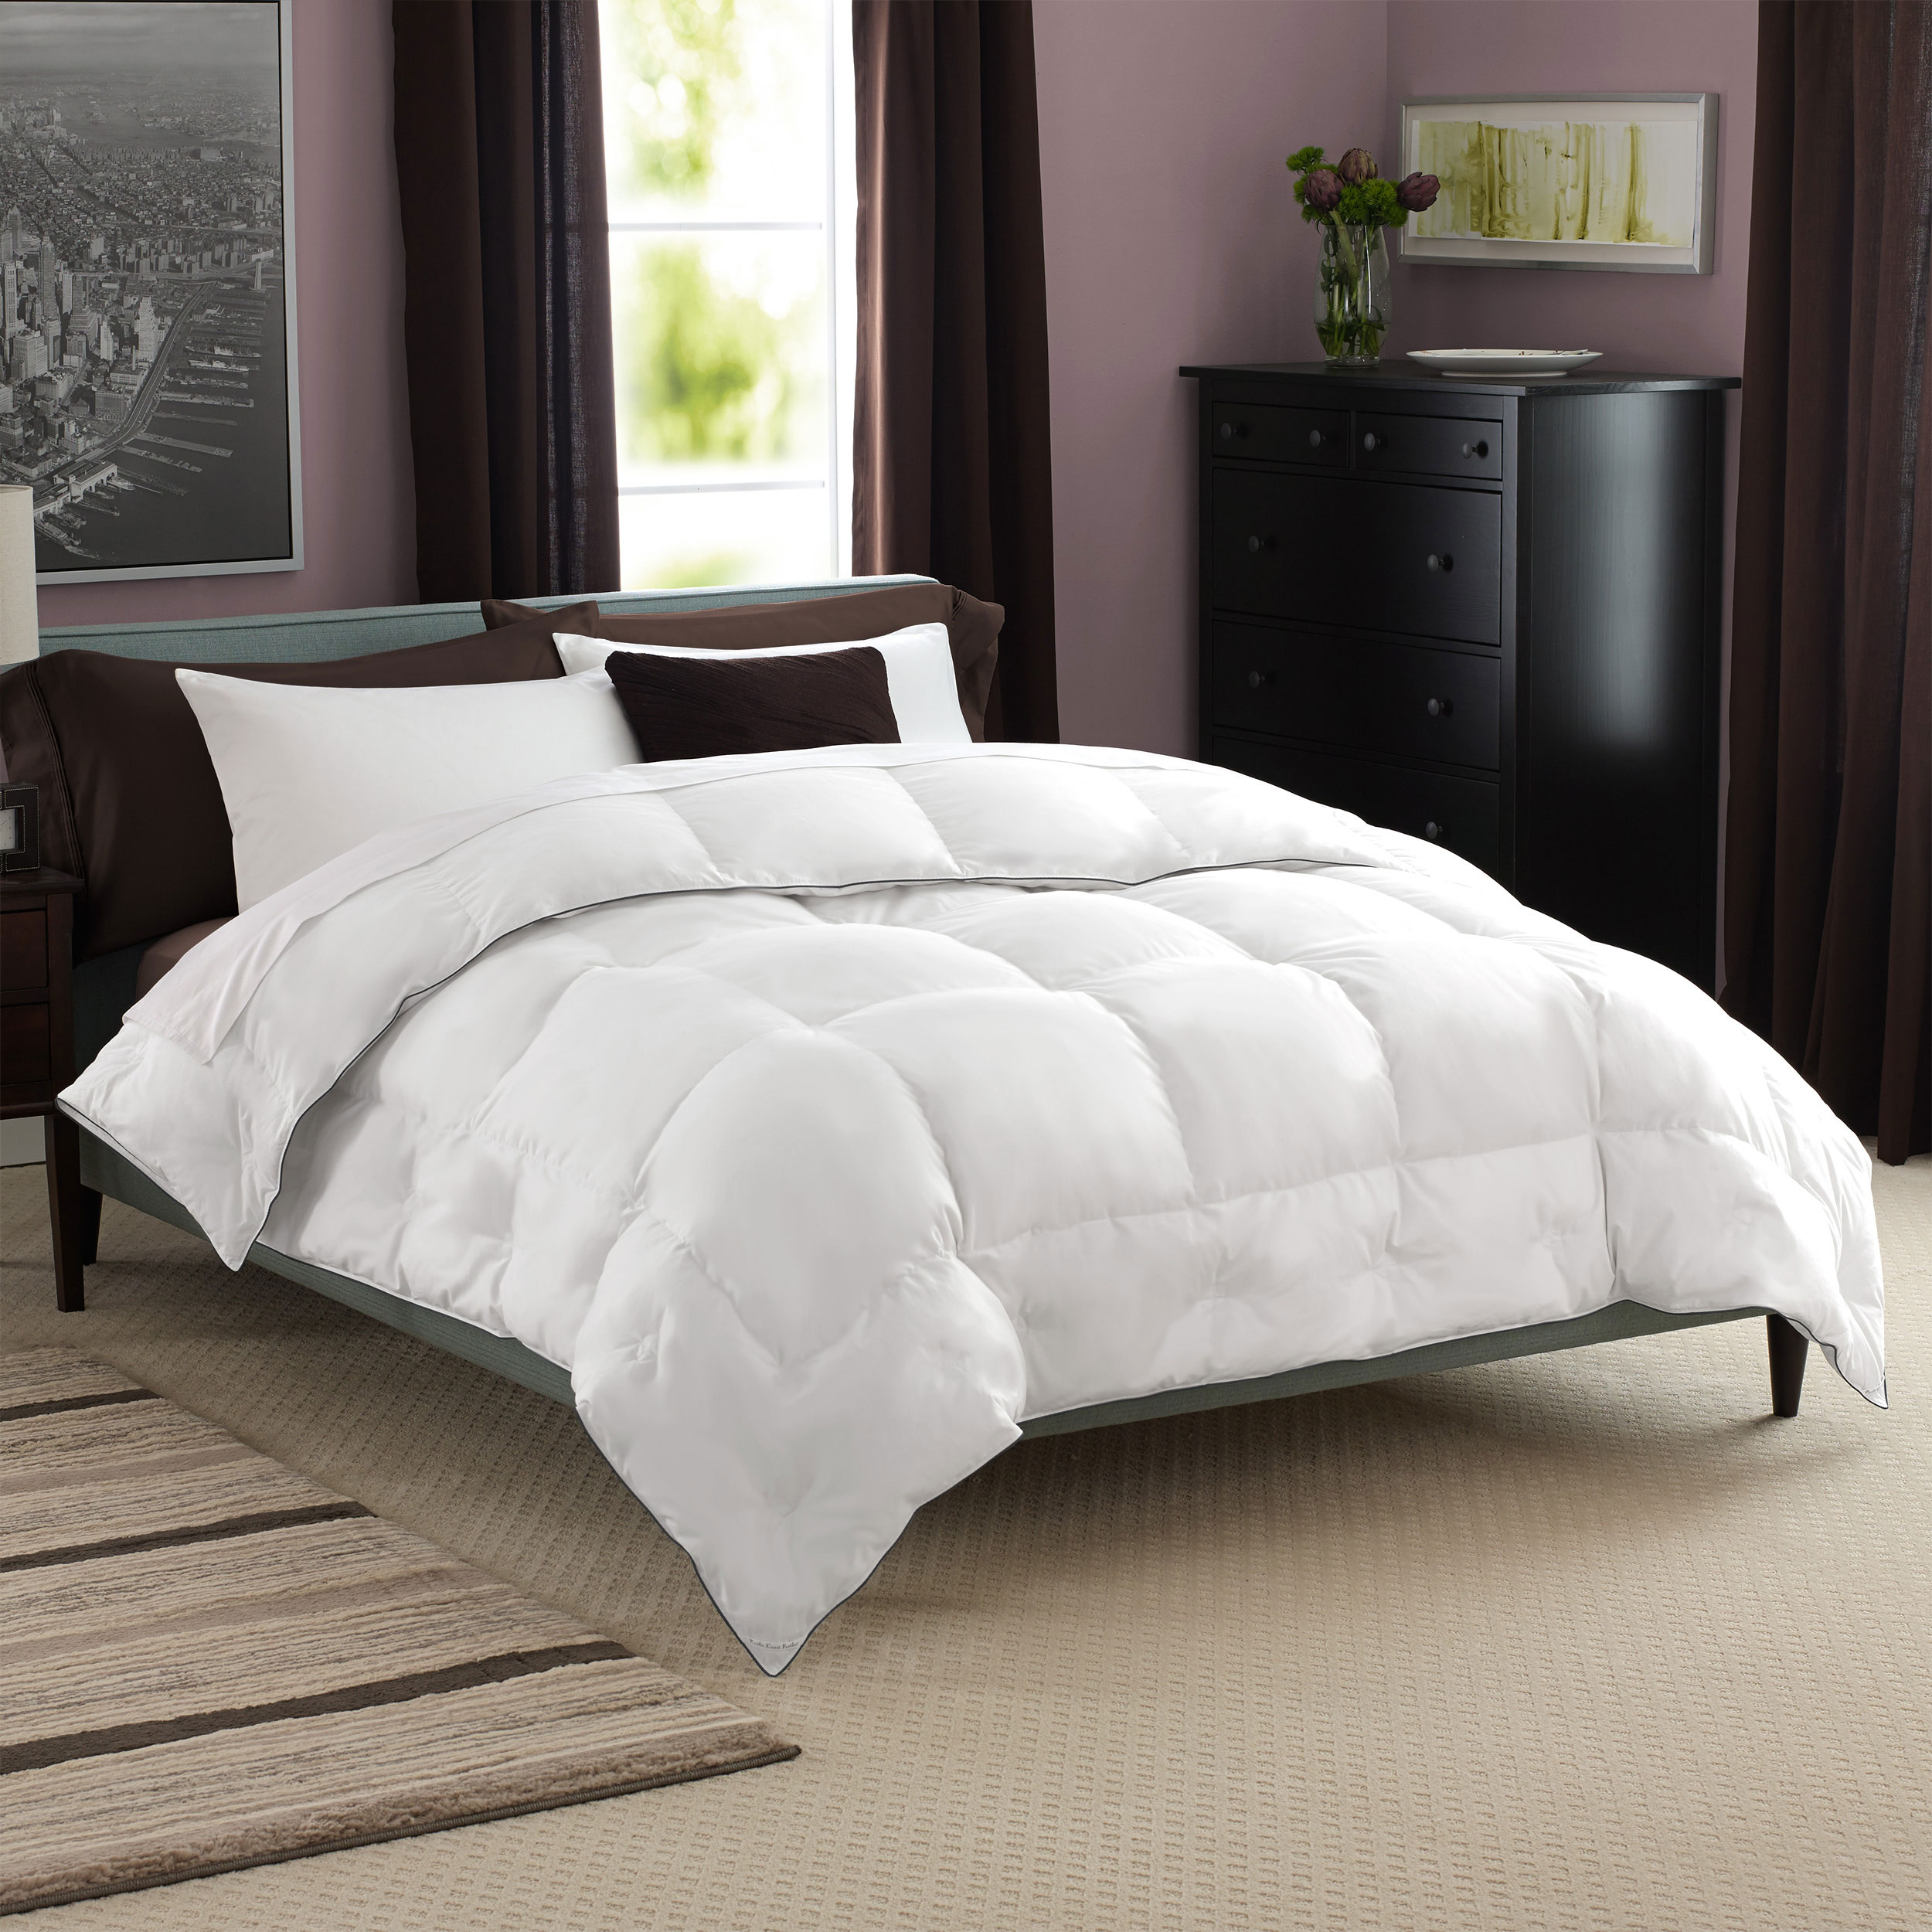 Pacific Coast Ultimate Extra Warmth Comforter 500 Thread Count 600 Fill Power Down - Full/queen